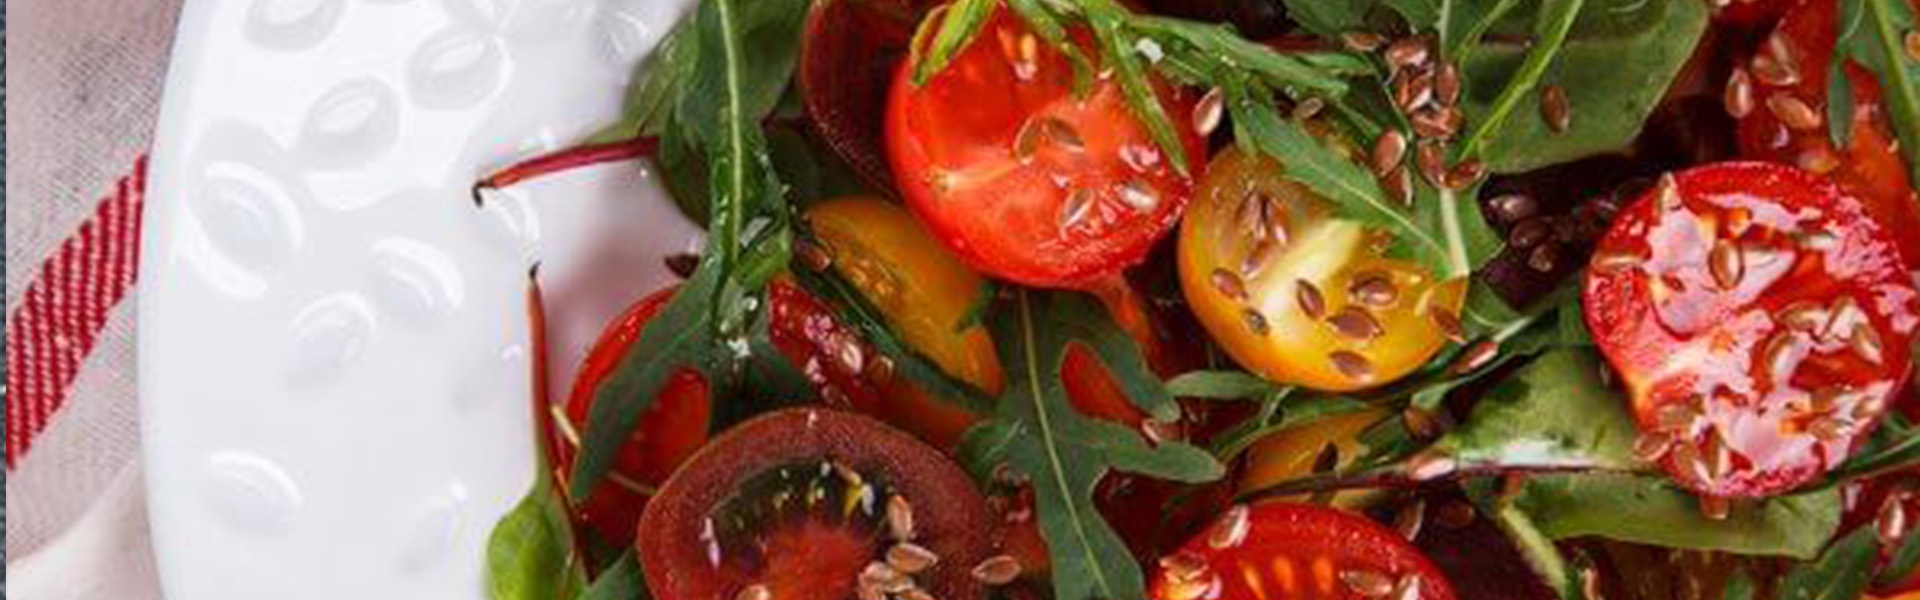 Tomato-Herb Dressing From Leftover Tomato Juice